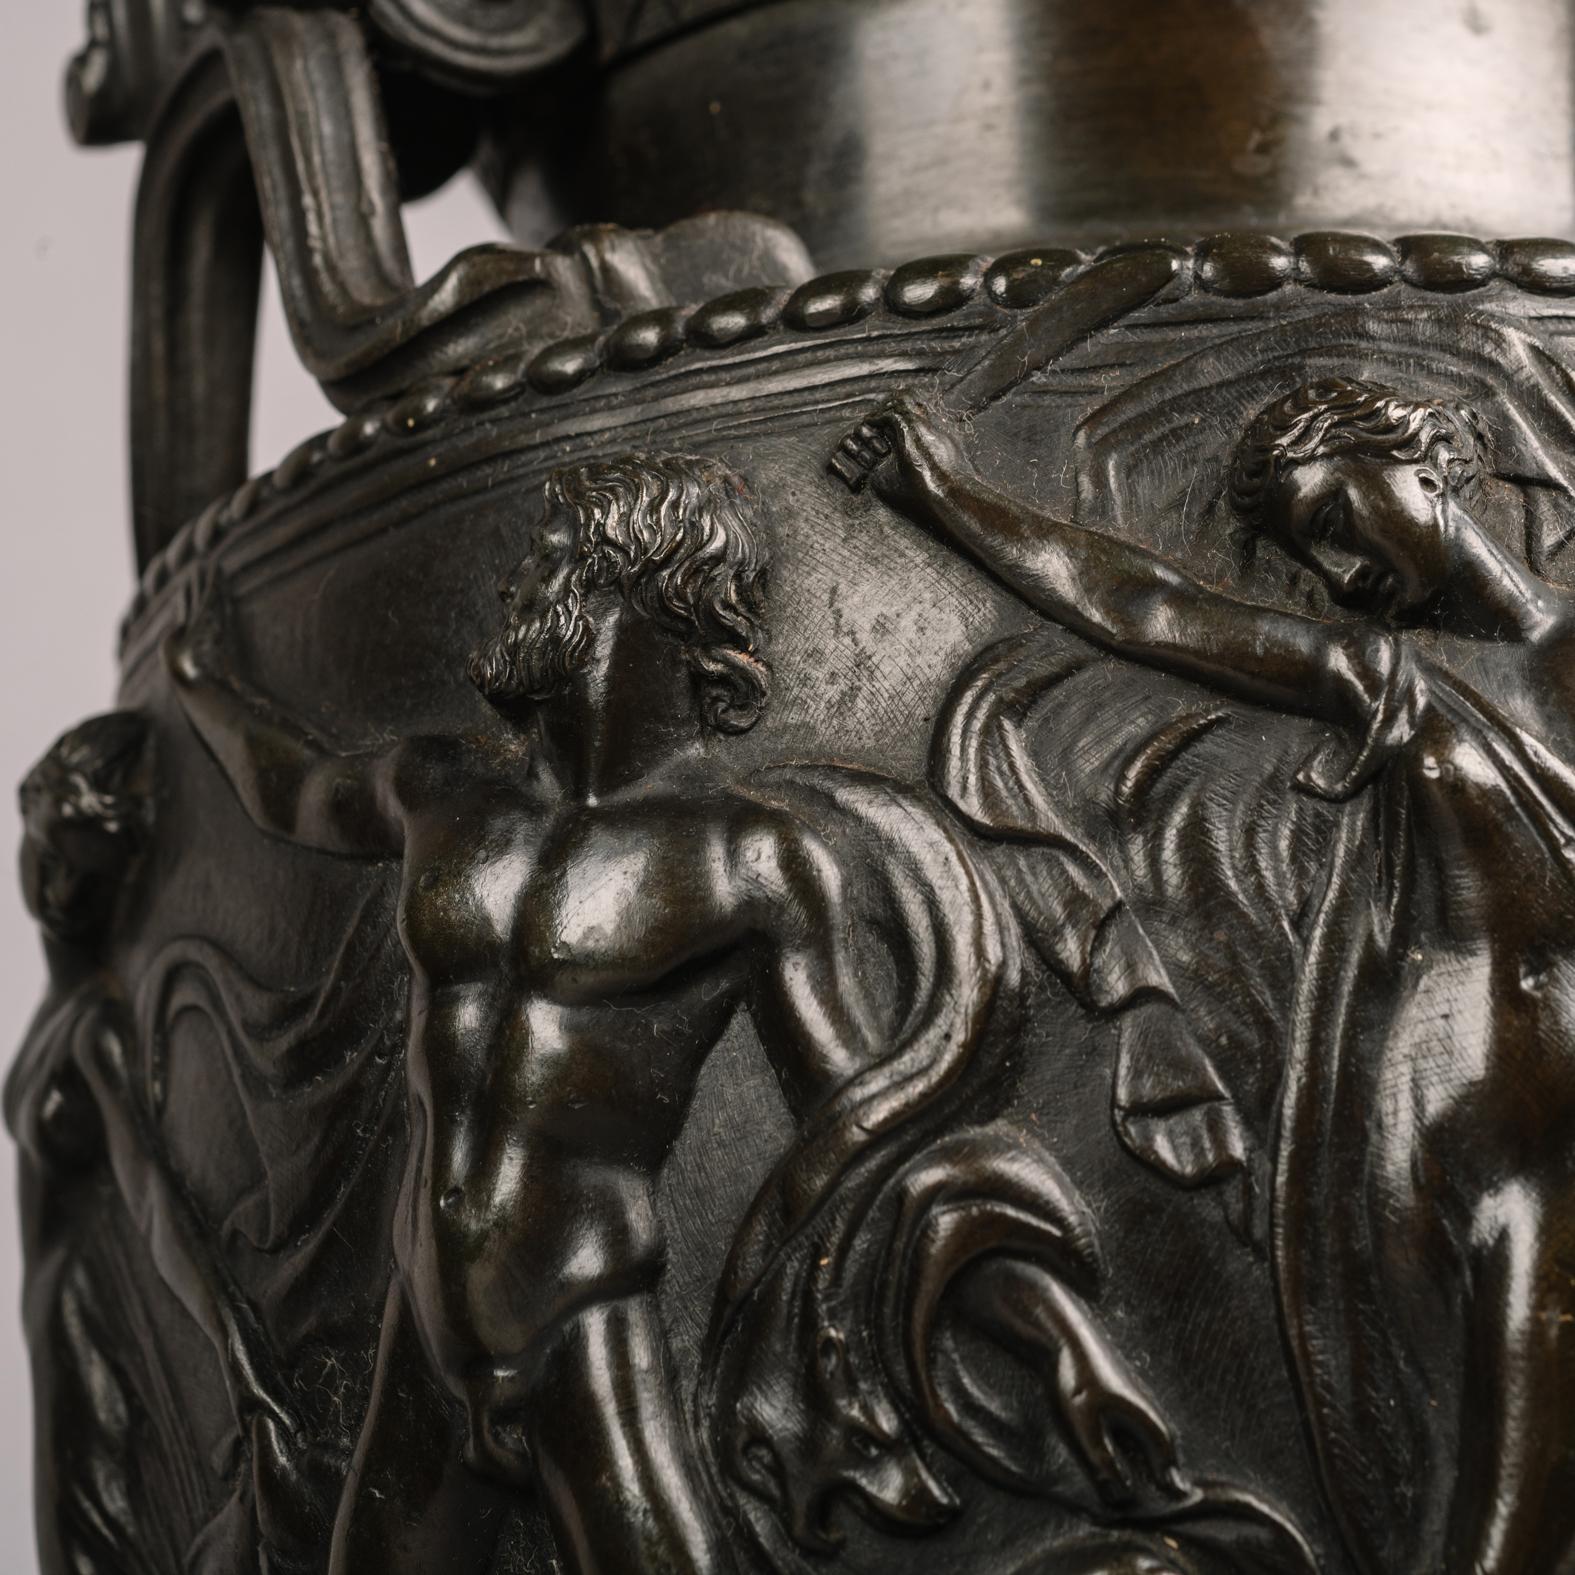 A fine pair of patinated bronze models of the townley vase, cast after the antique, by Auguste-Maximilien Delafontaine.

The bronze stamped to the underside ‘AD’ for Auguste-Maximillian Delafontaine. 

Each vase is of krater form with elaborate